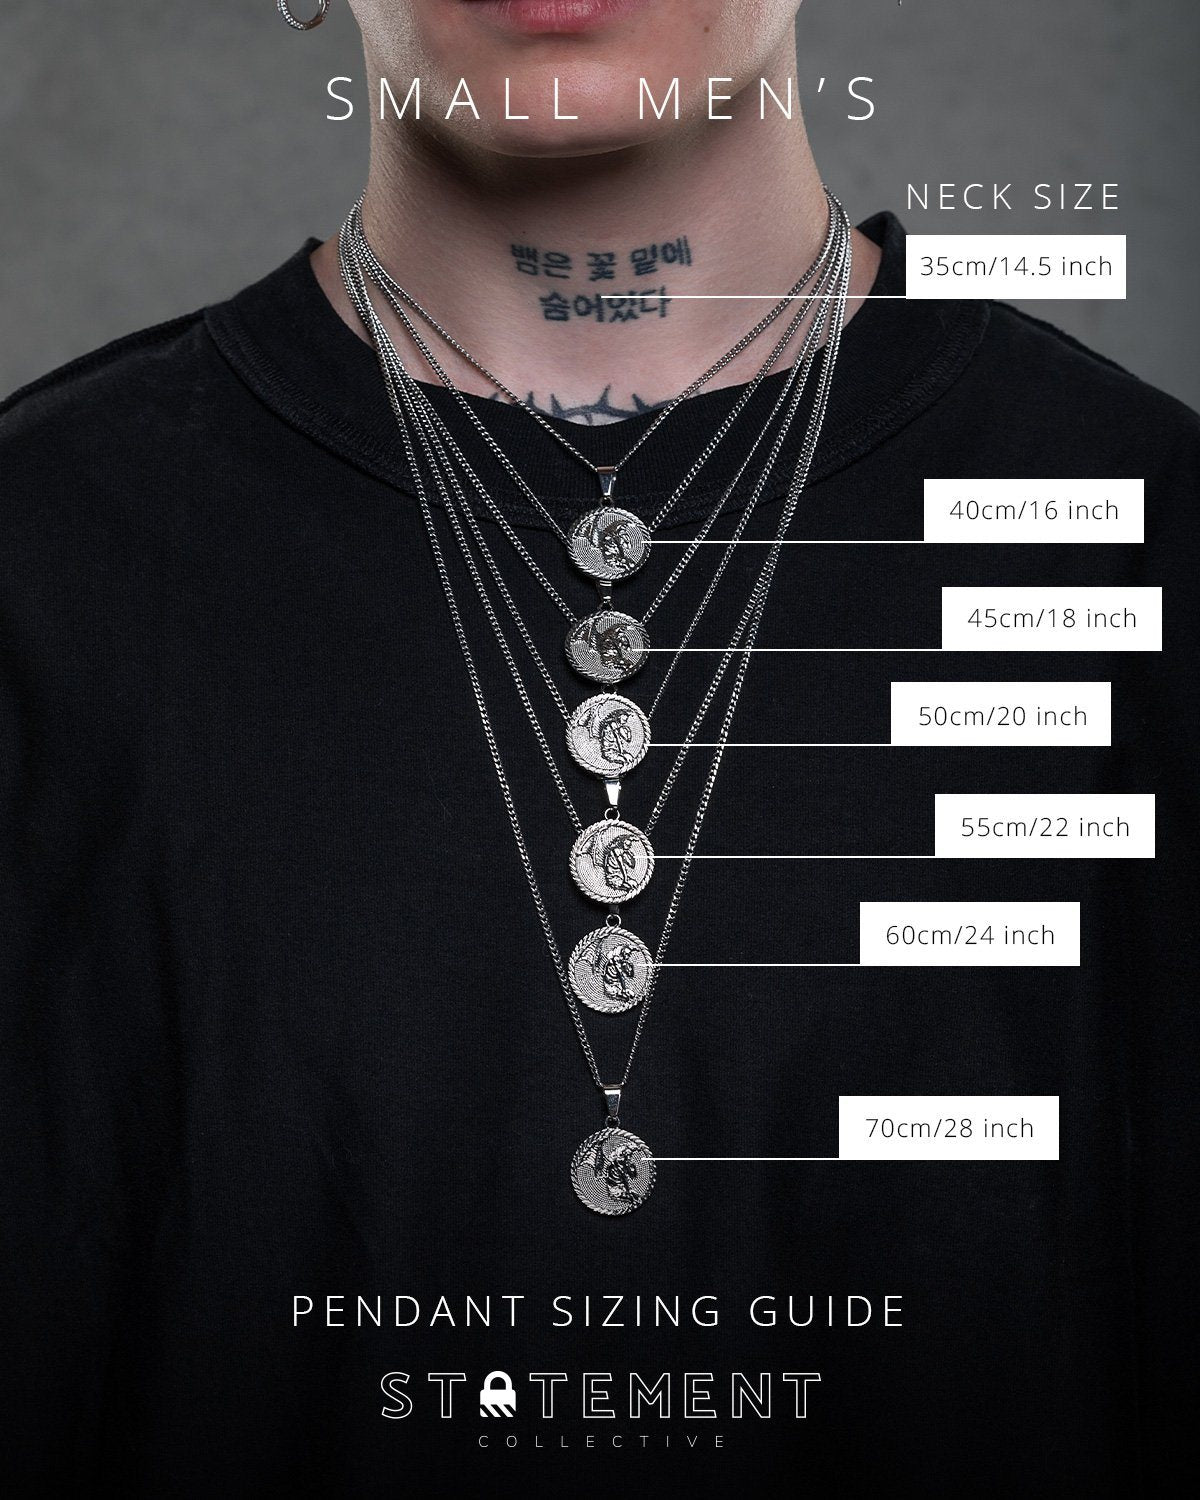 Small Mens Pendant Sizing Guide 